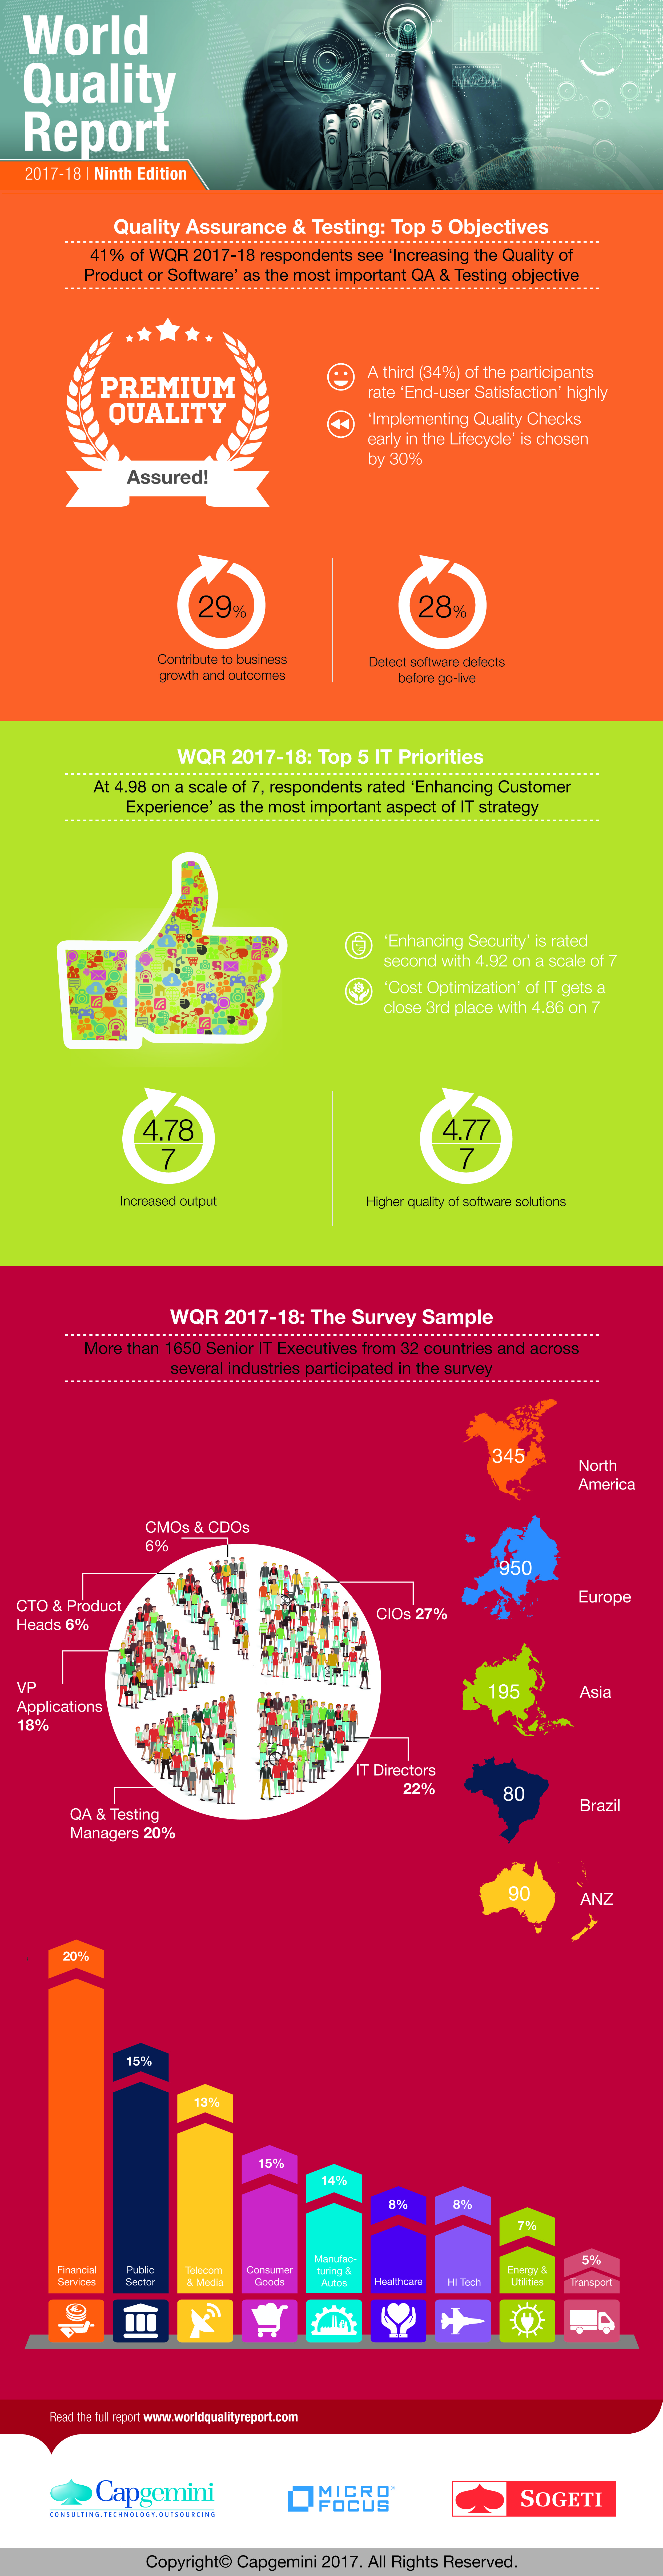 World Quality Report 2017-18 infographic